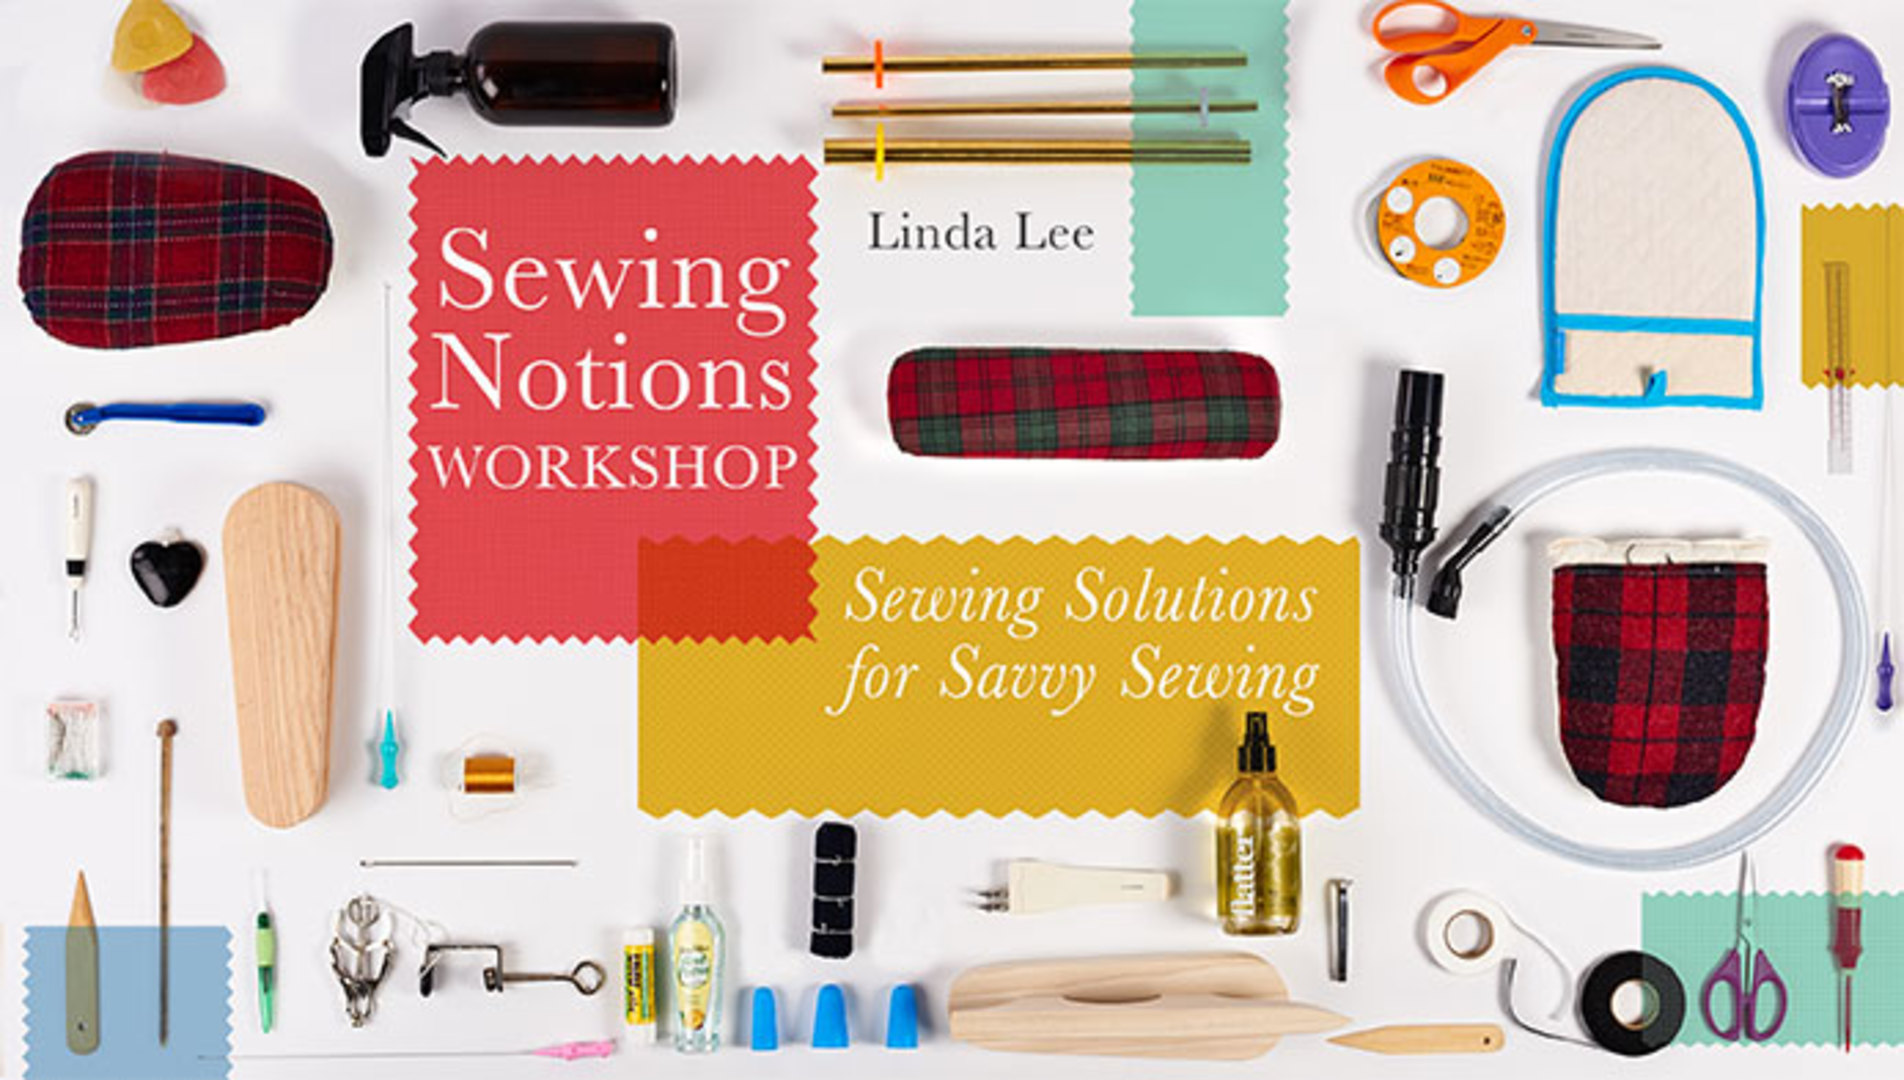 Sewing Notions Workshop: Solutions for Savvy Sewing